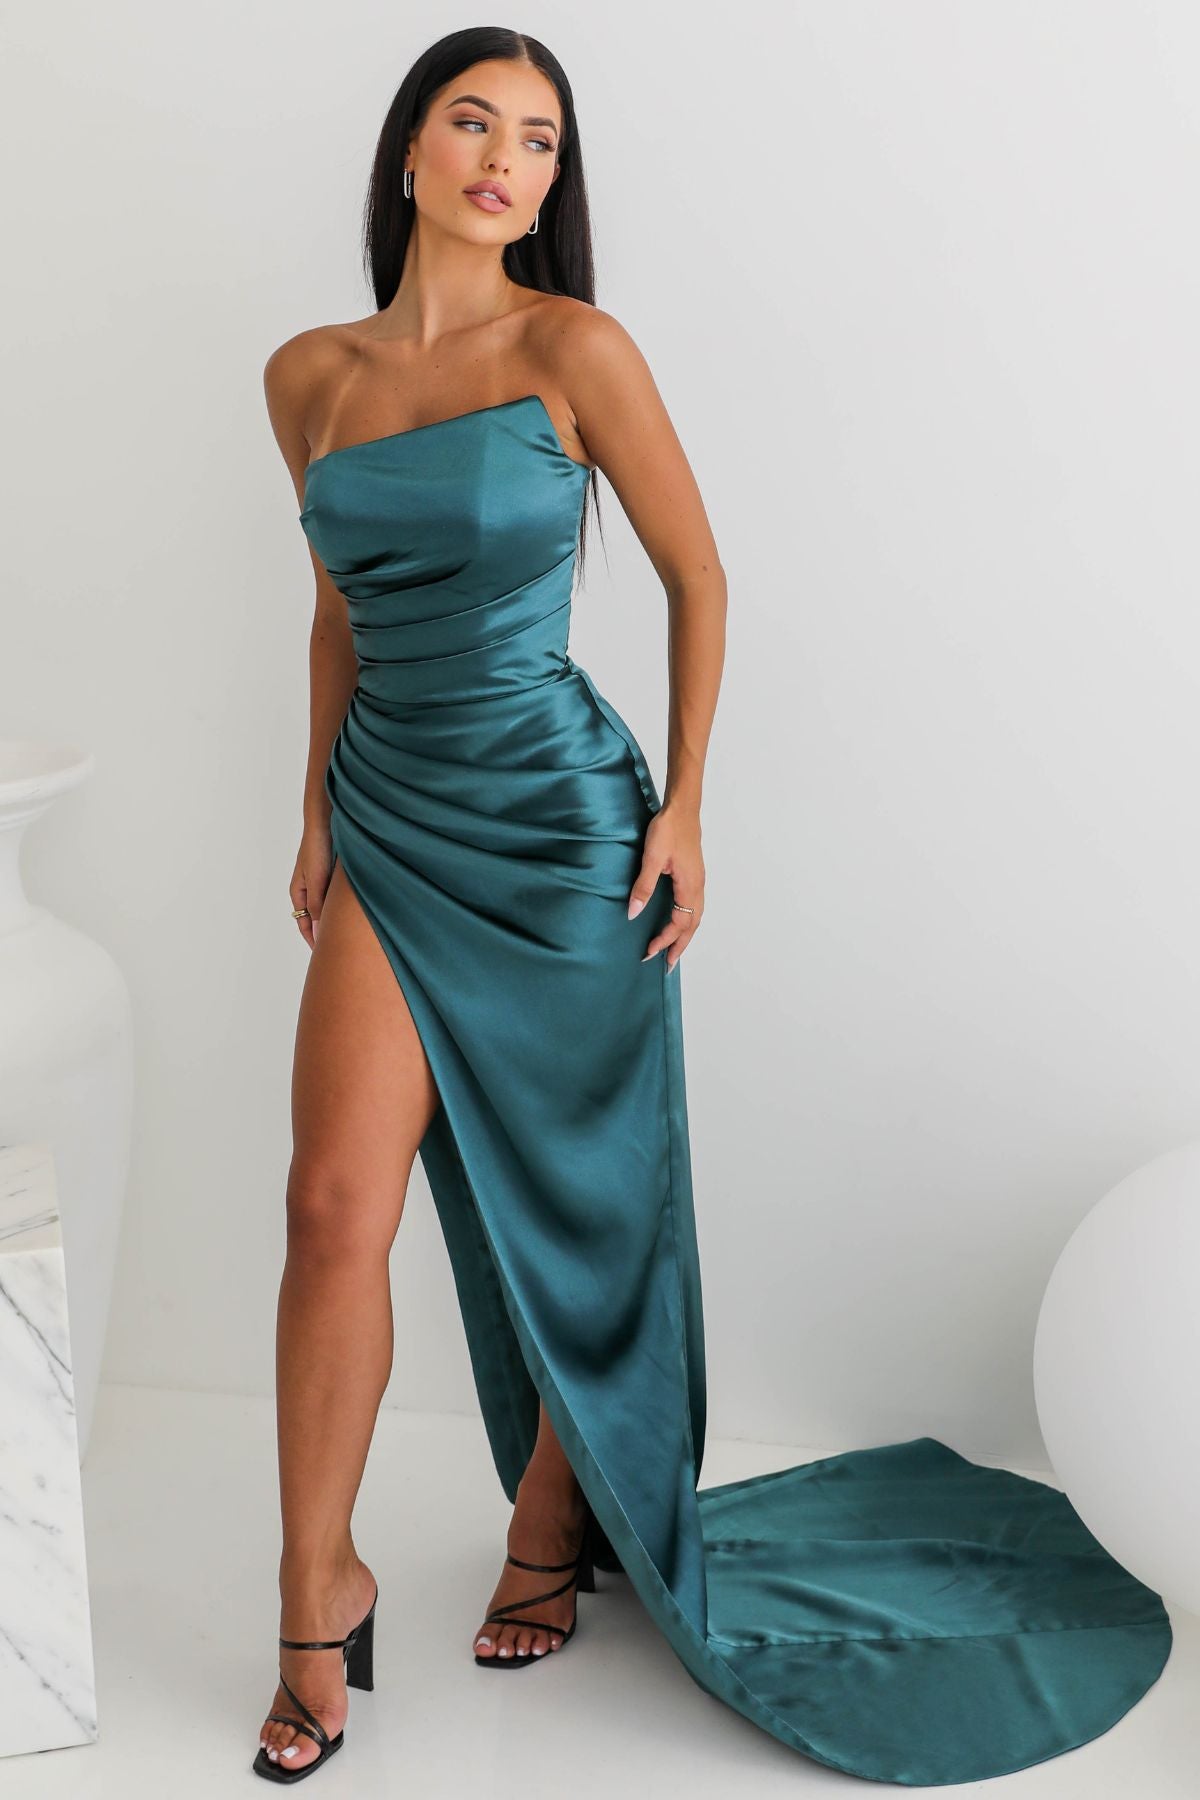 Rent LIA STUBLLA - Eviana Gown (Emerald) - hire this dress | Dress for ...